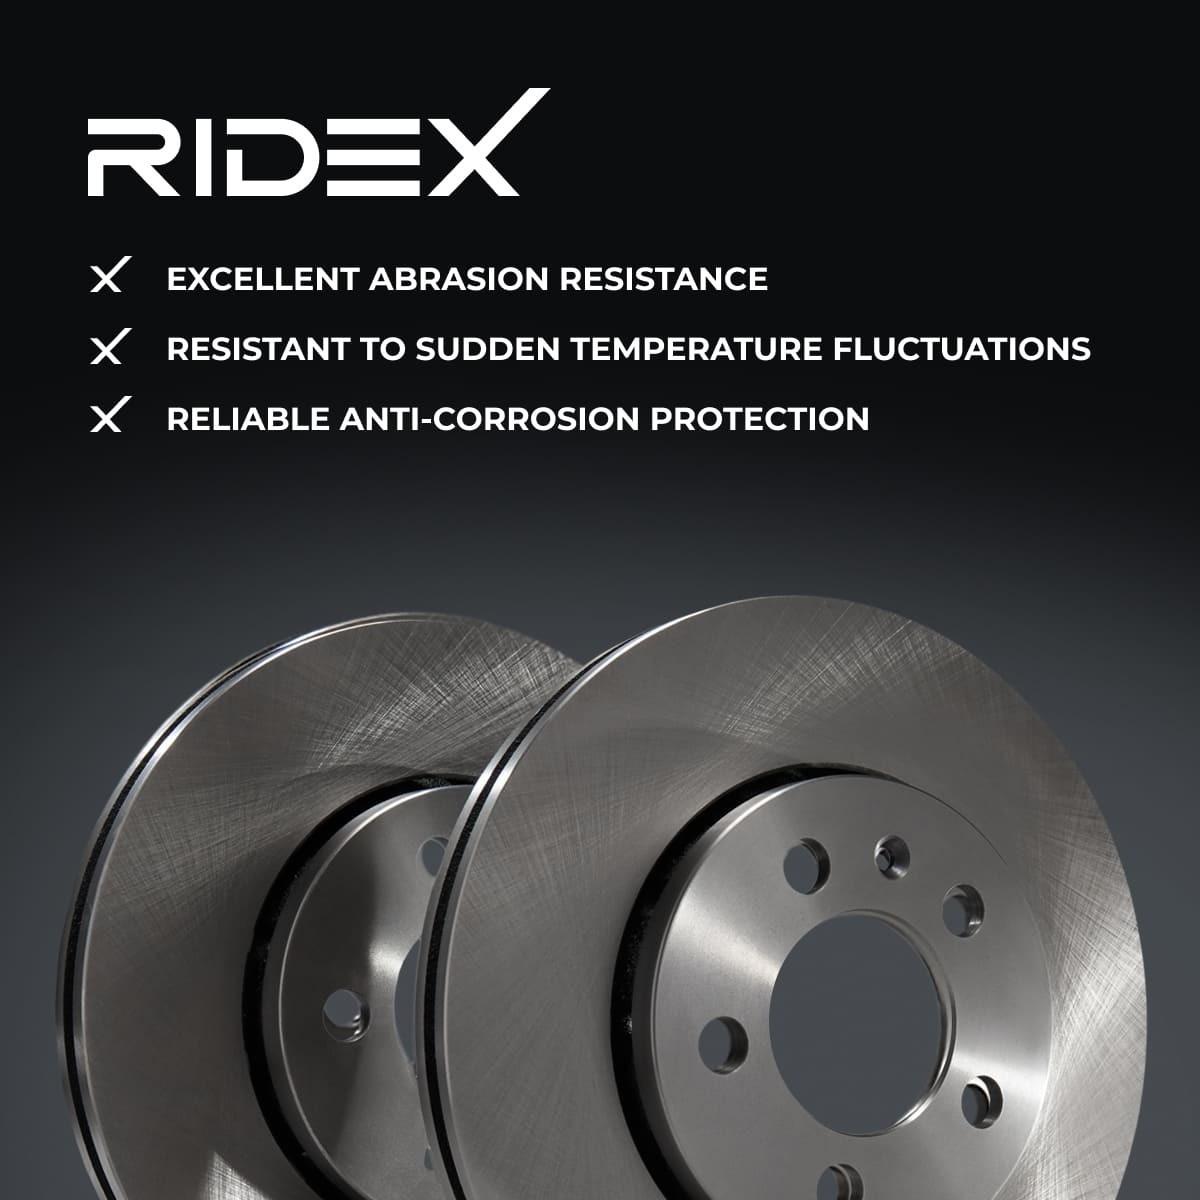 RIDEX 82B0438 Brake rotor Front Axle, 302,0x21,9, 22mm, 05/07x120, internally vented, Uncoated